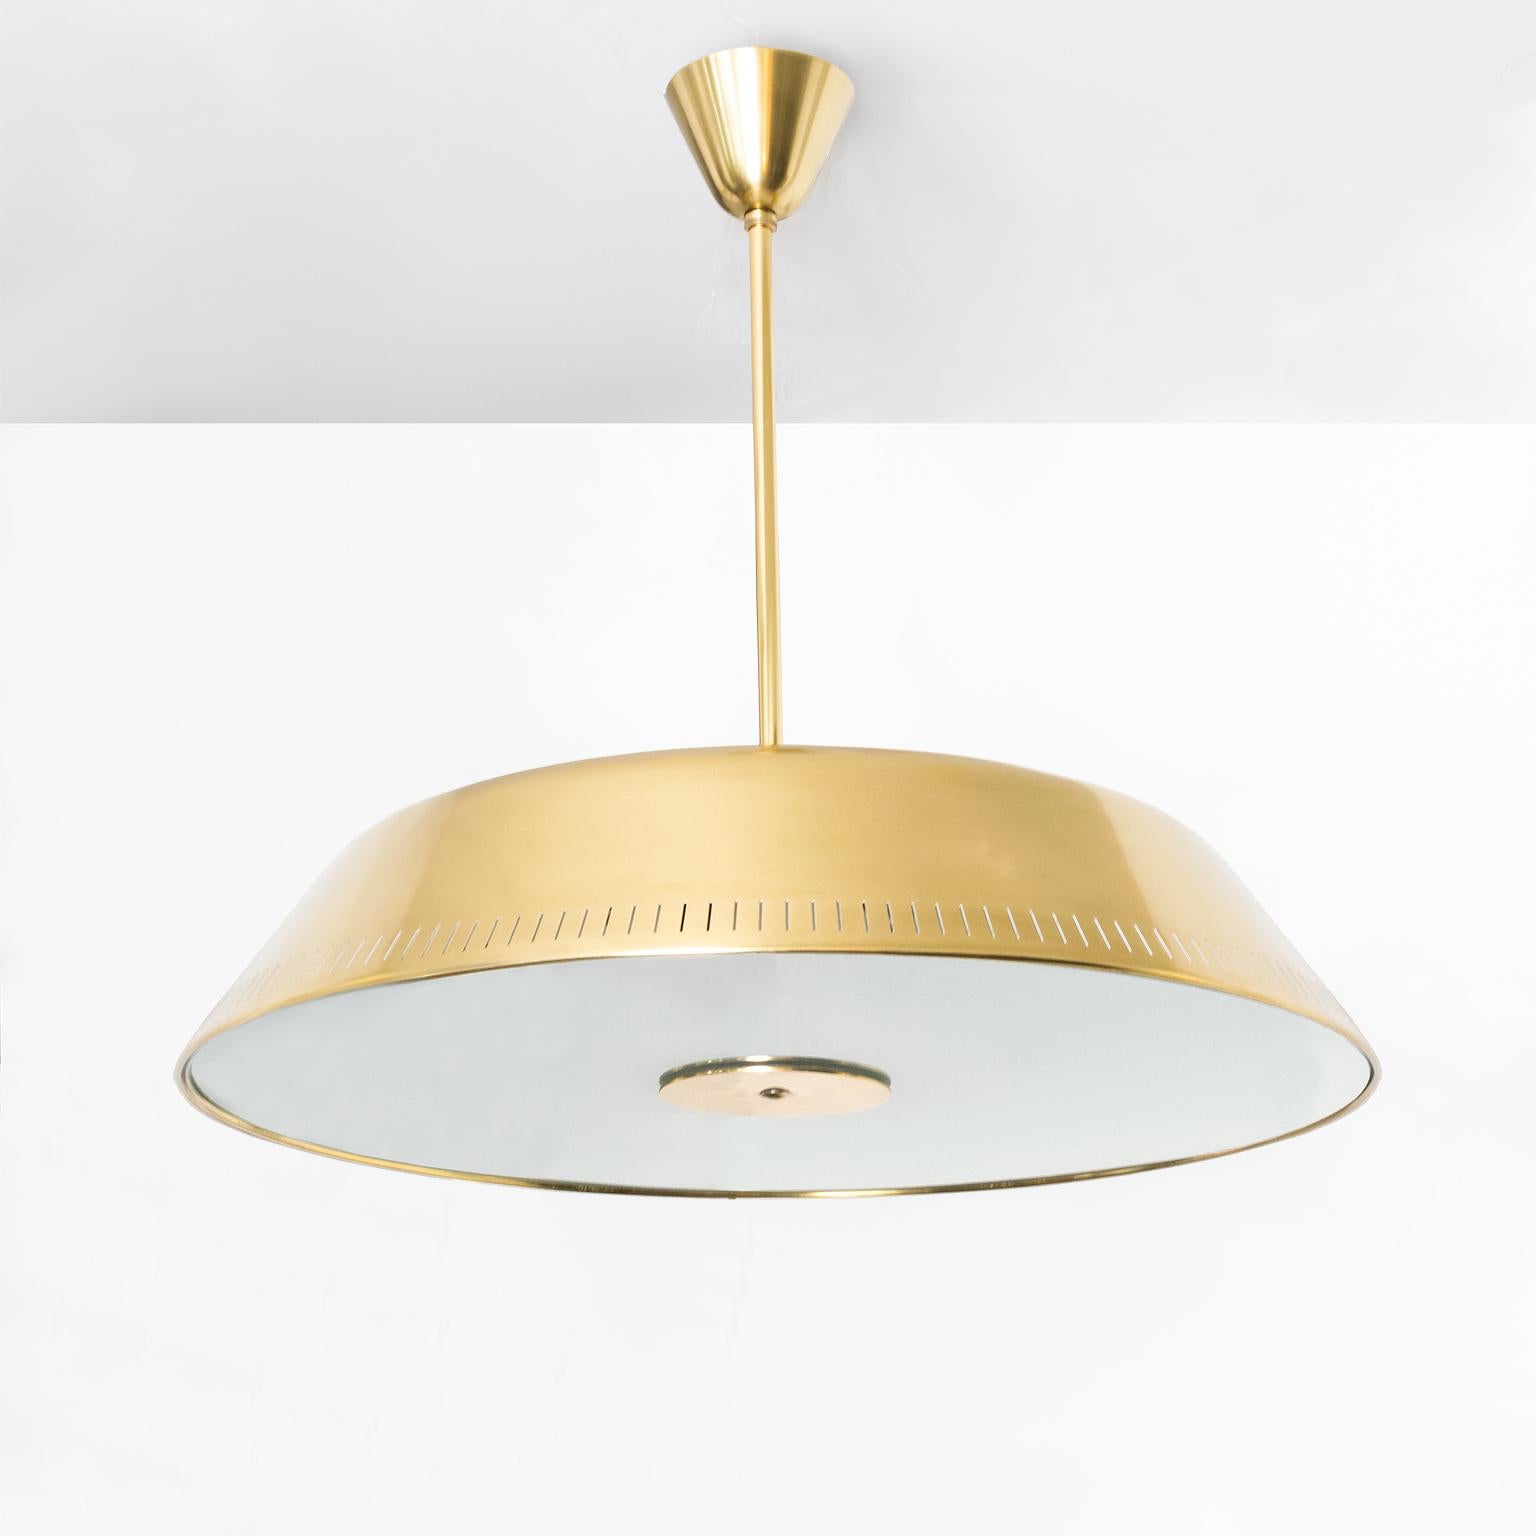 Sleek Scandinavian Modern polished brass and glass pendant designed by Harald Notini made by Böhlmarks, Sweden. This fixture has been completely restored, (polished and lacquered) and newly rewired for us in the USA with 6 internal standard base